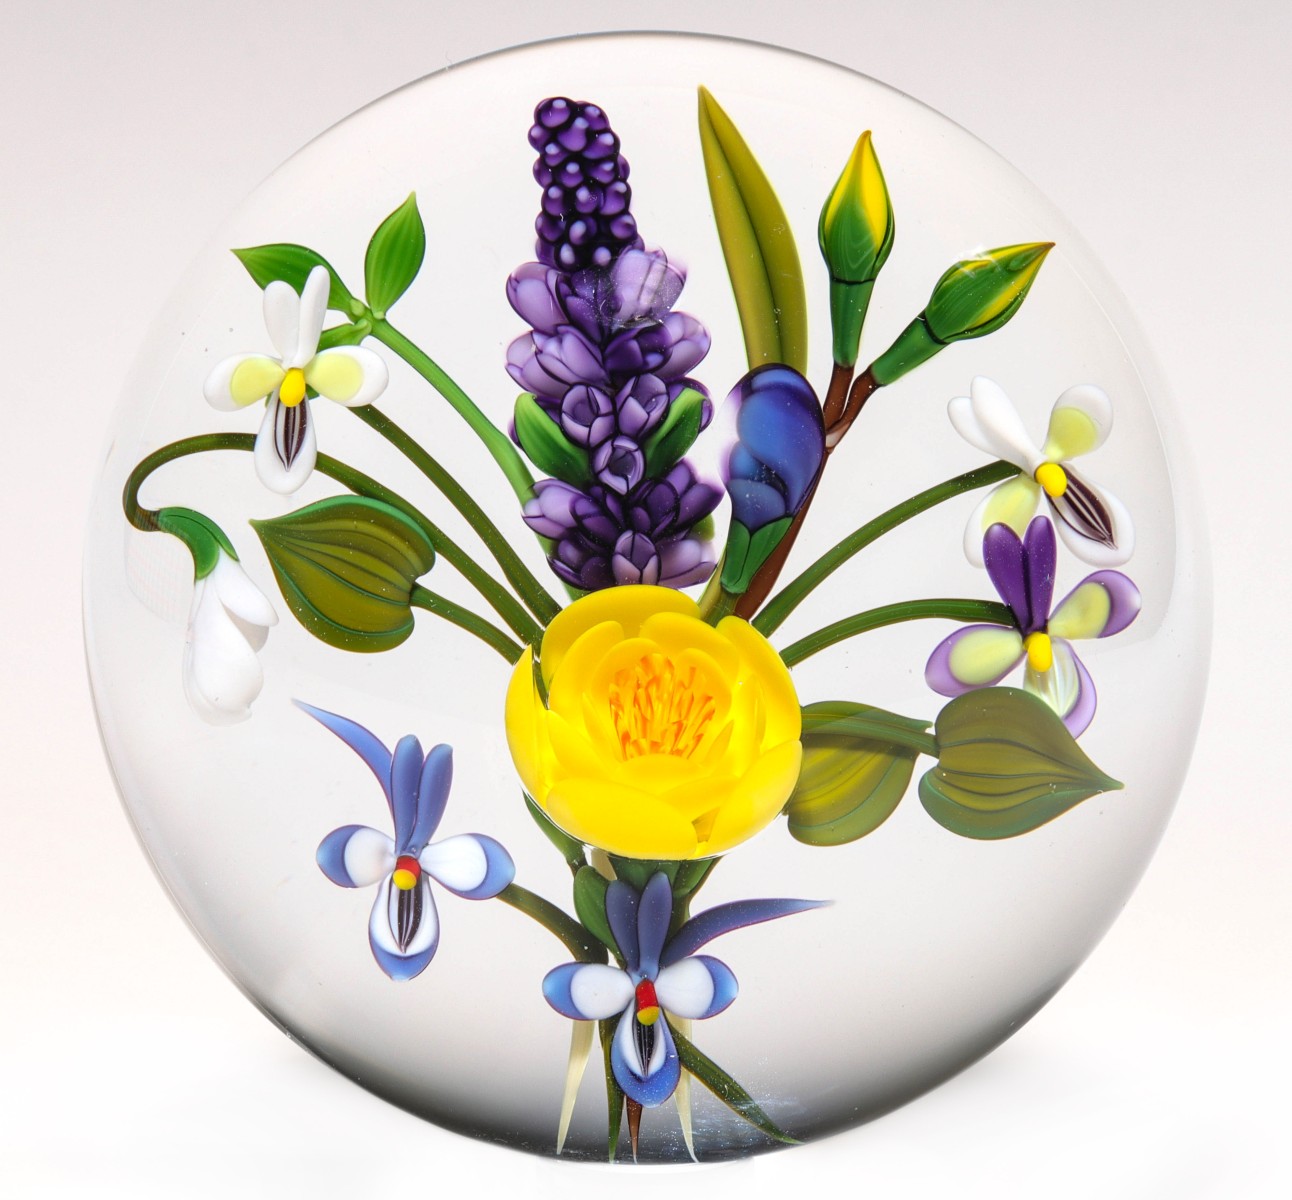 BUZZINI LAMPWORK BOUQUET OF YELLOW, LAVENDER AND BLUE